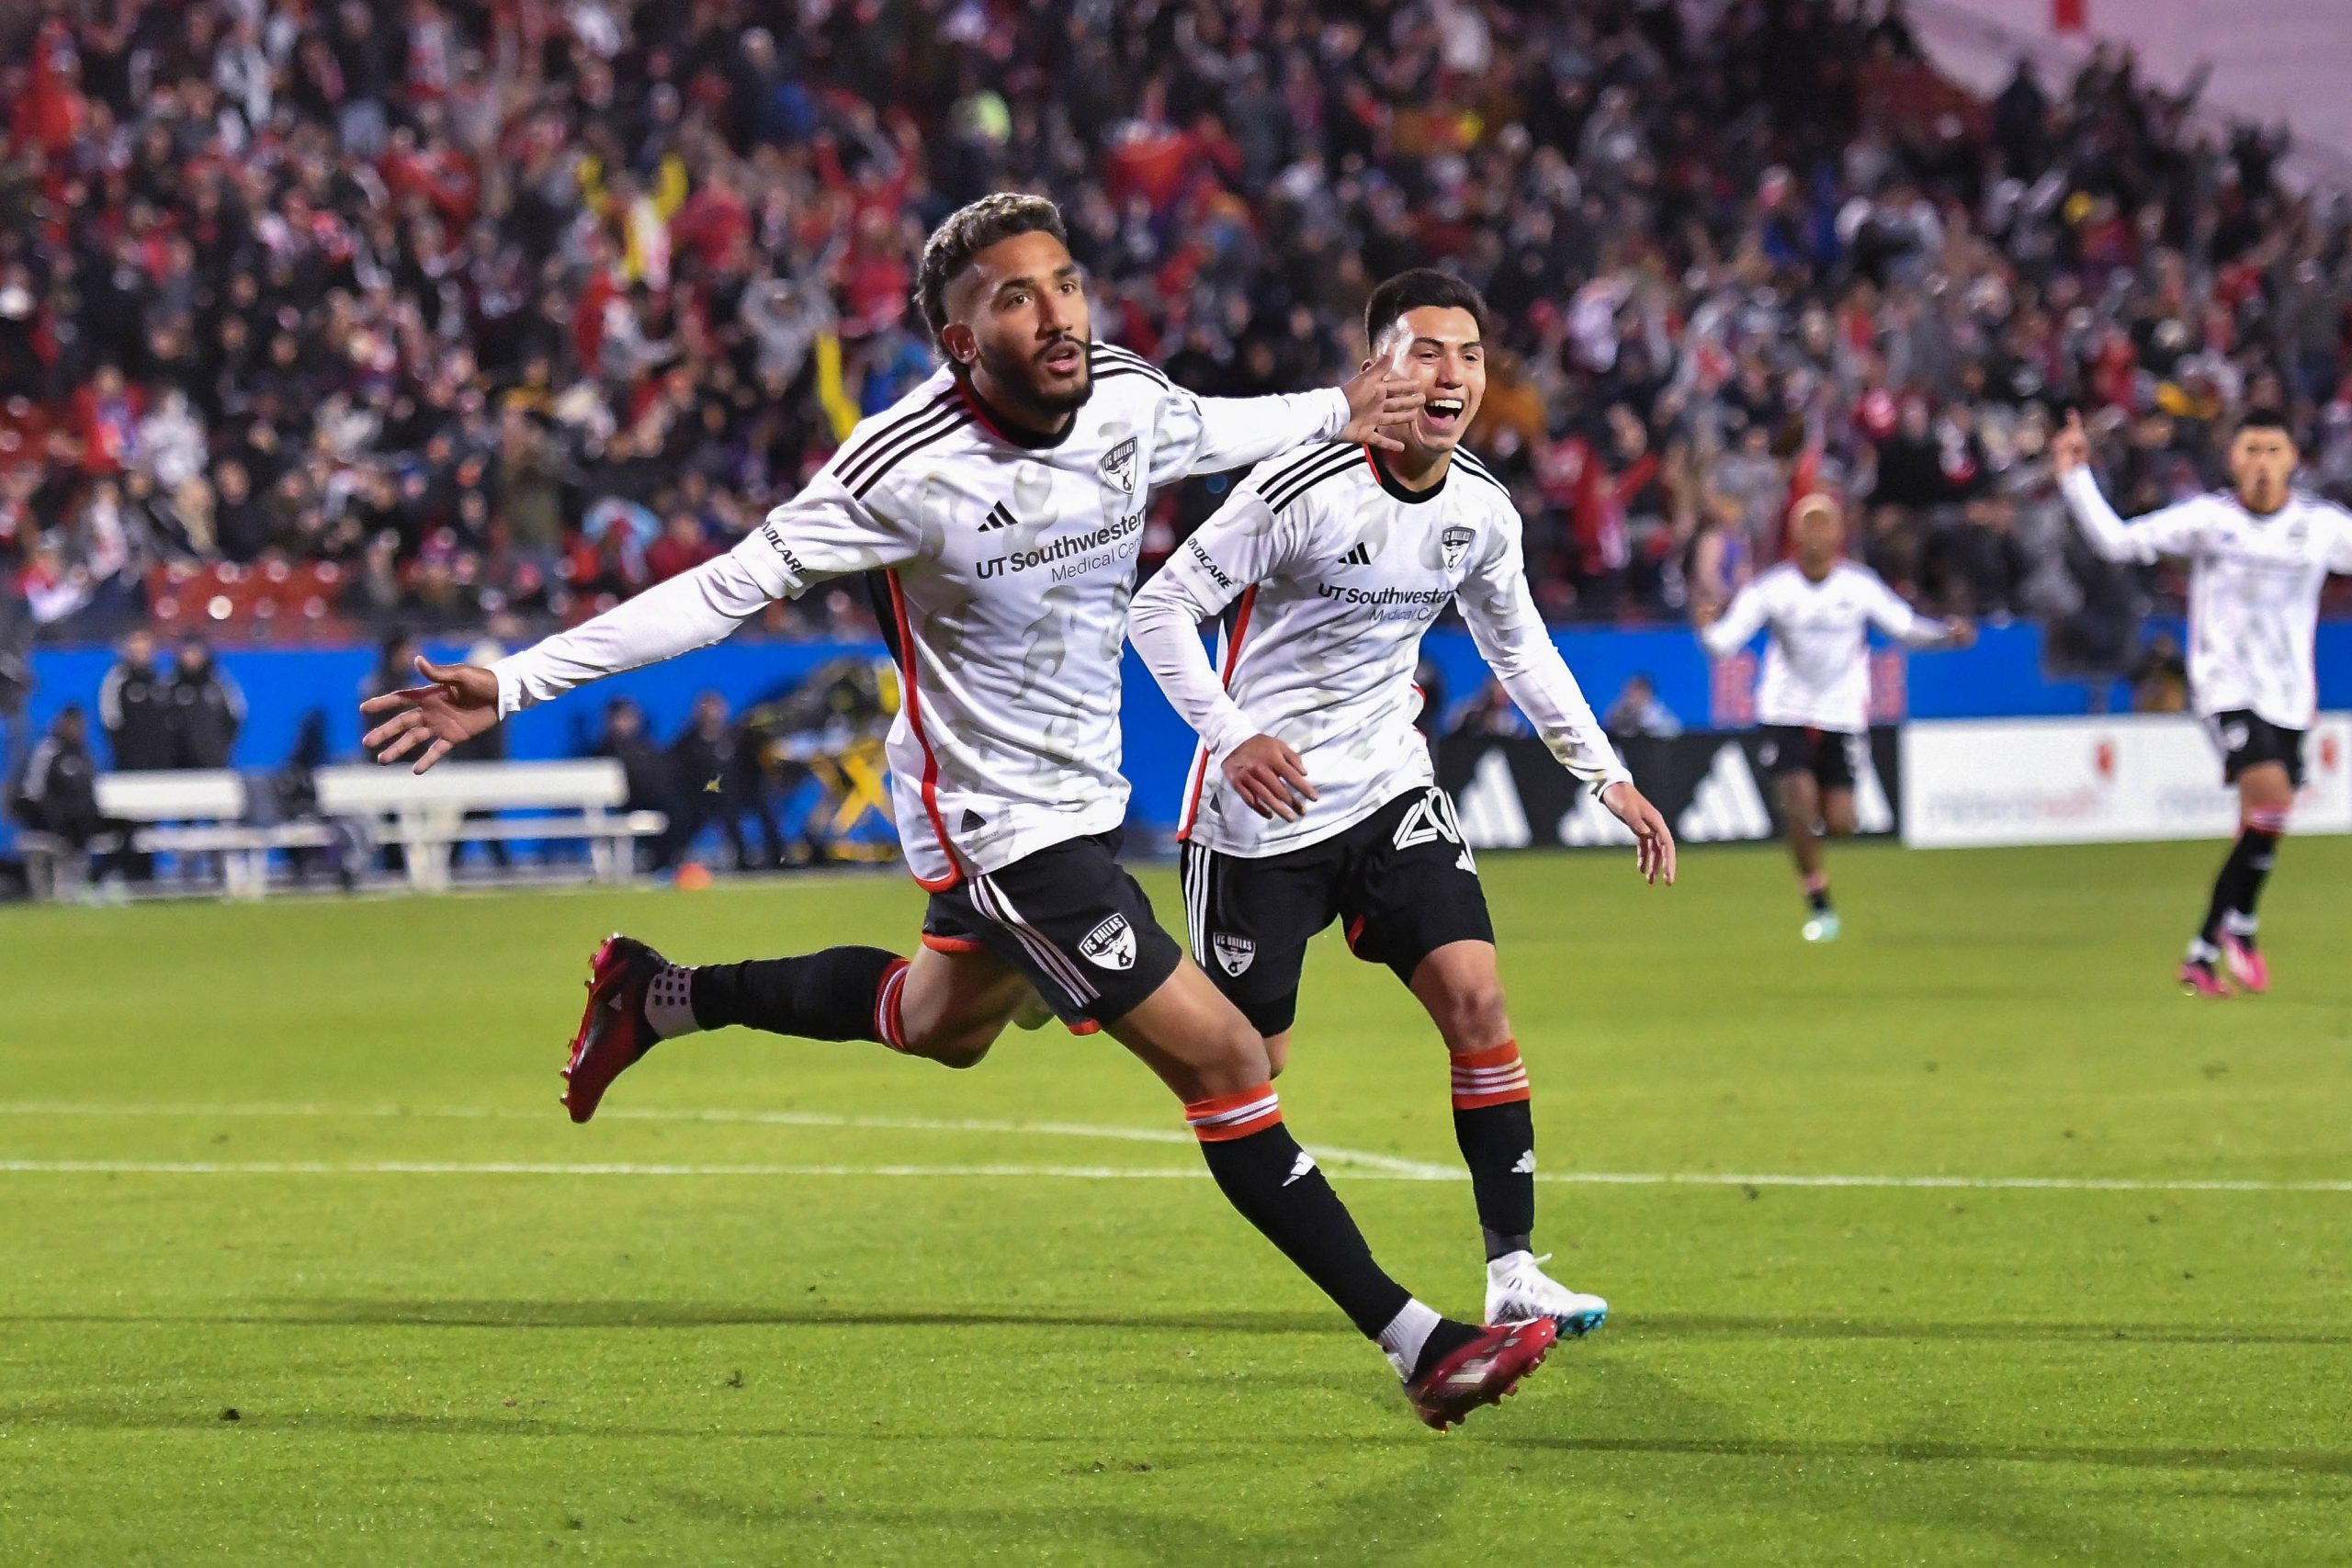 Jesus Ferreira celebrates his game-winning goal in the MLS match against Sporting KC on Saturday, March 18, 2023, at Toyota Stadium. (Daniel McCullough, 3rd Degree)